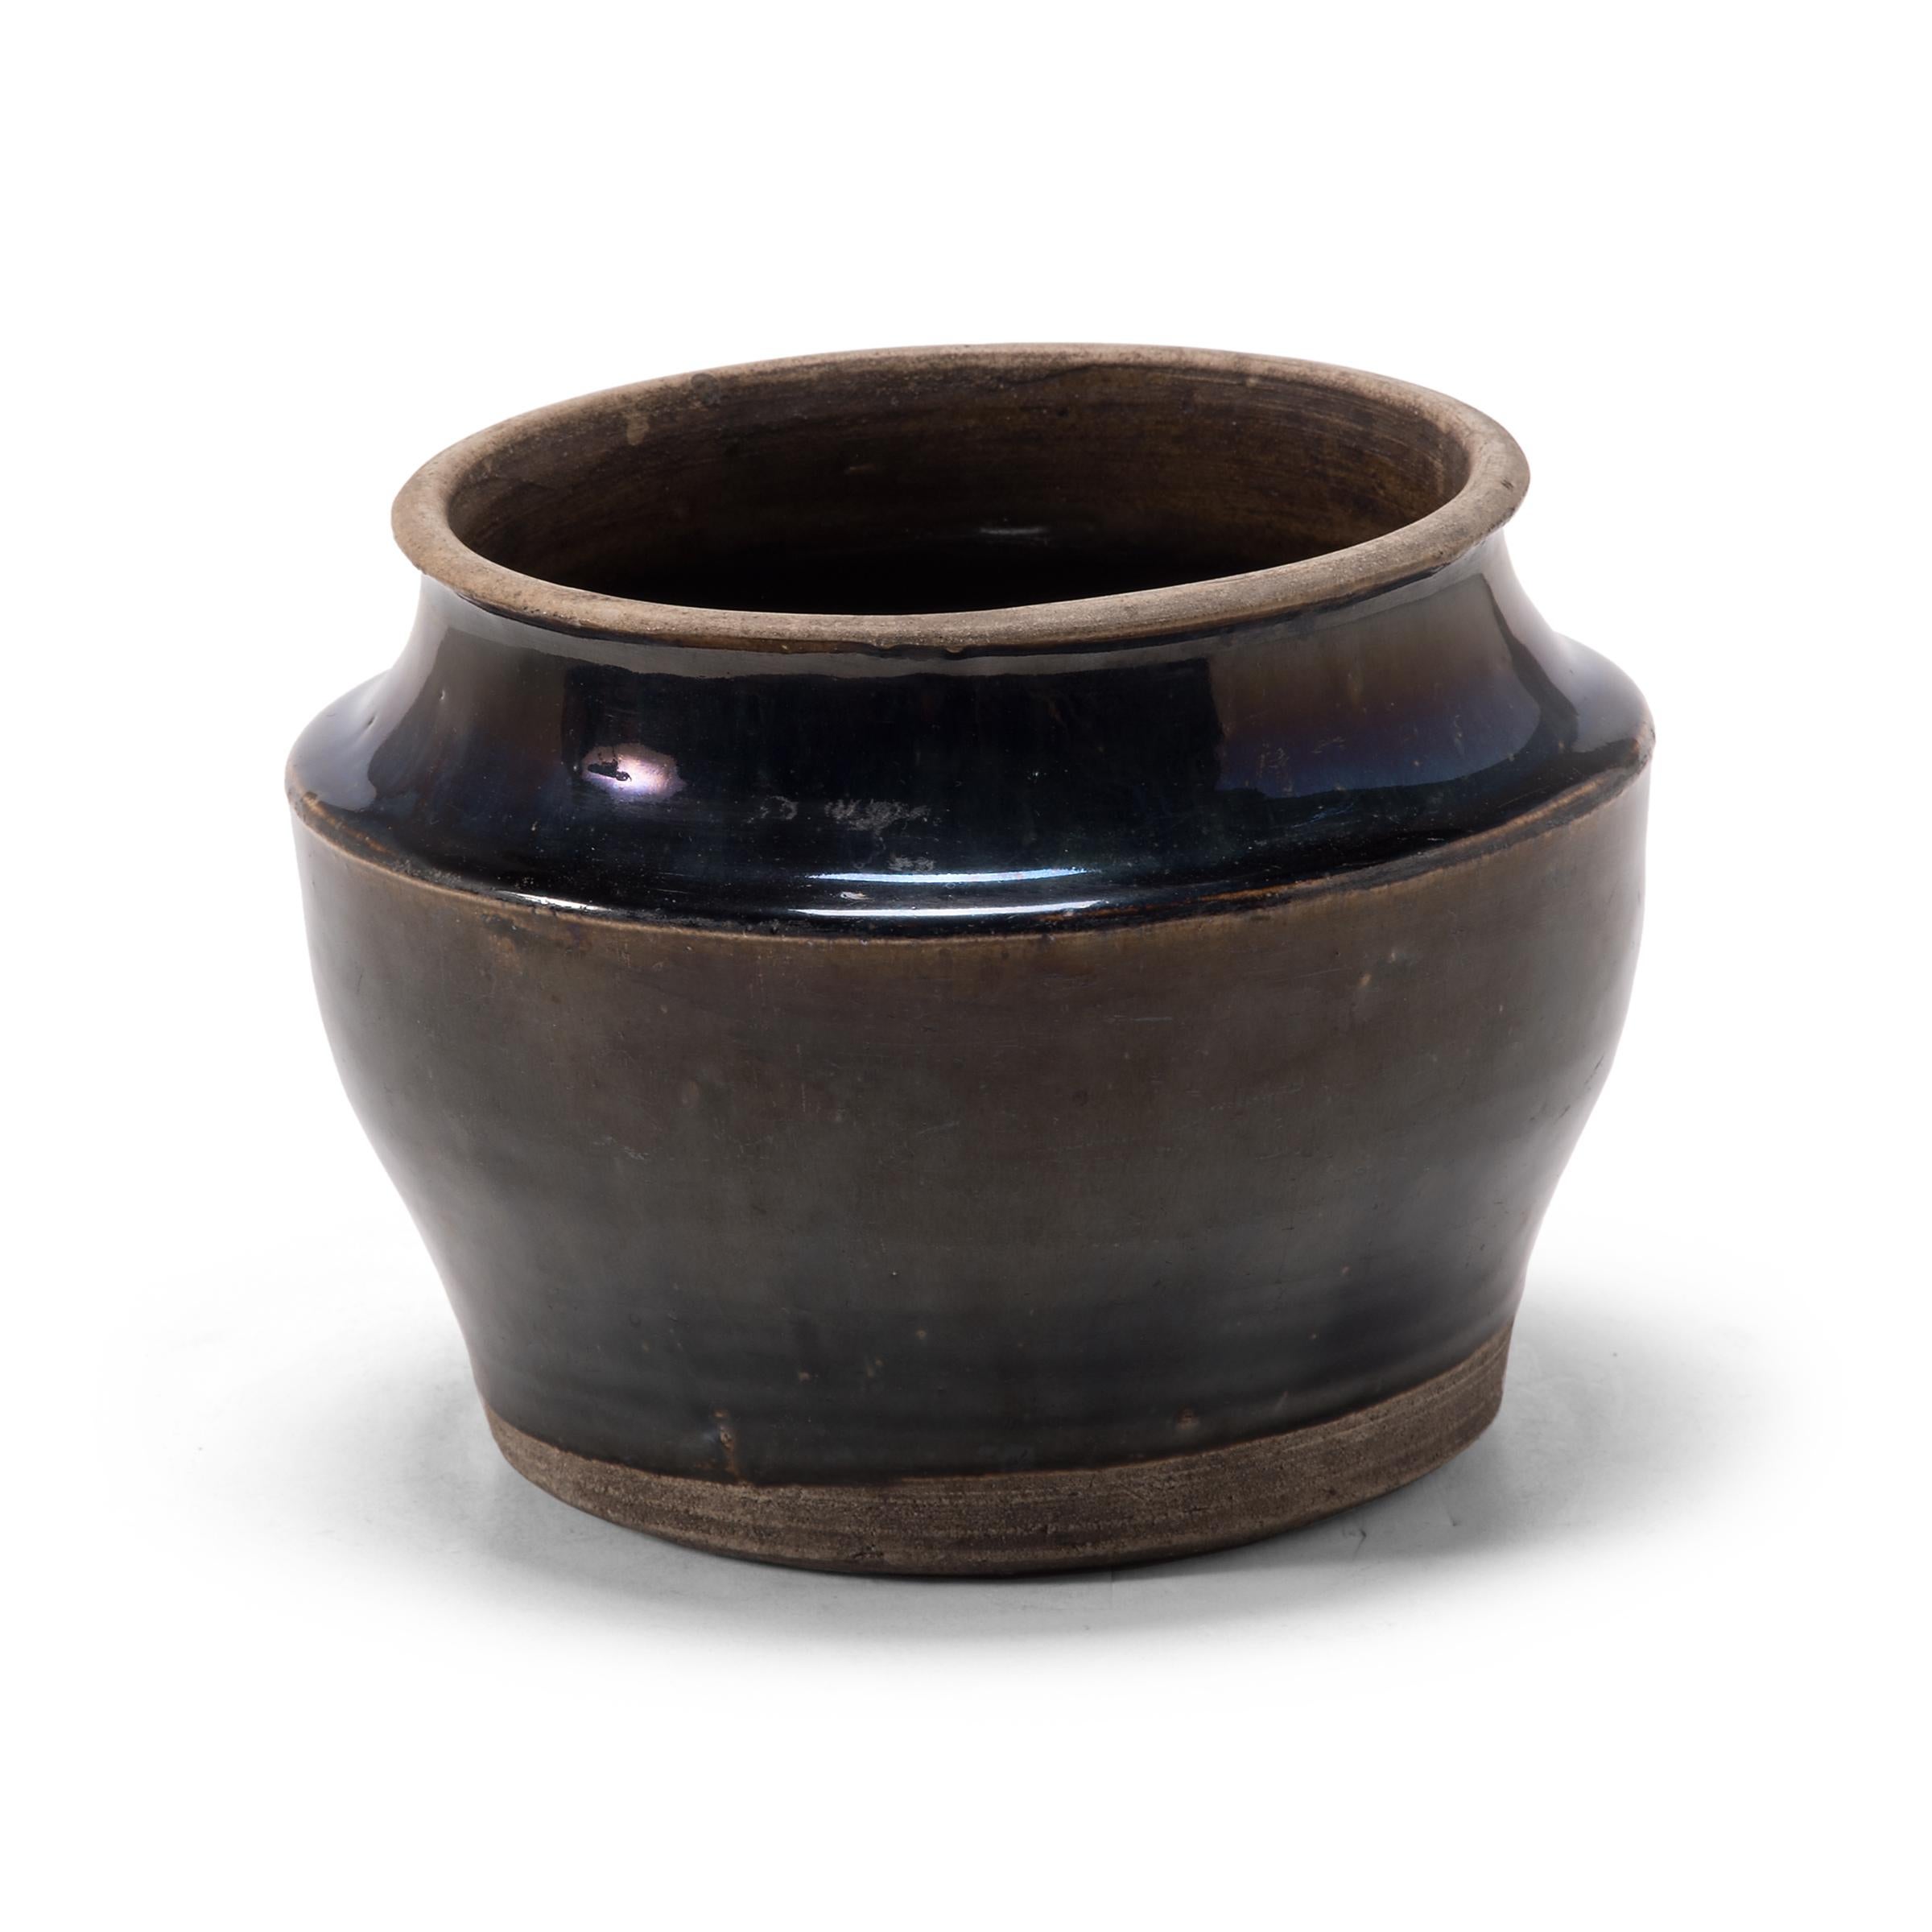 A dark glaze coats the body of this squat kitchen vessel, pooling at the angular shoulders. The petite early 20th century dish was once used for storing food in a Qing-dynasty kitchen, as evidenced by its interior glaze. Dotted with imperfections,